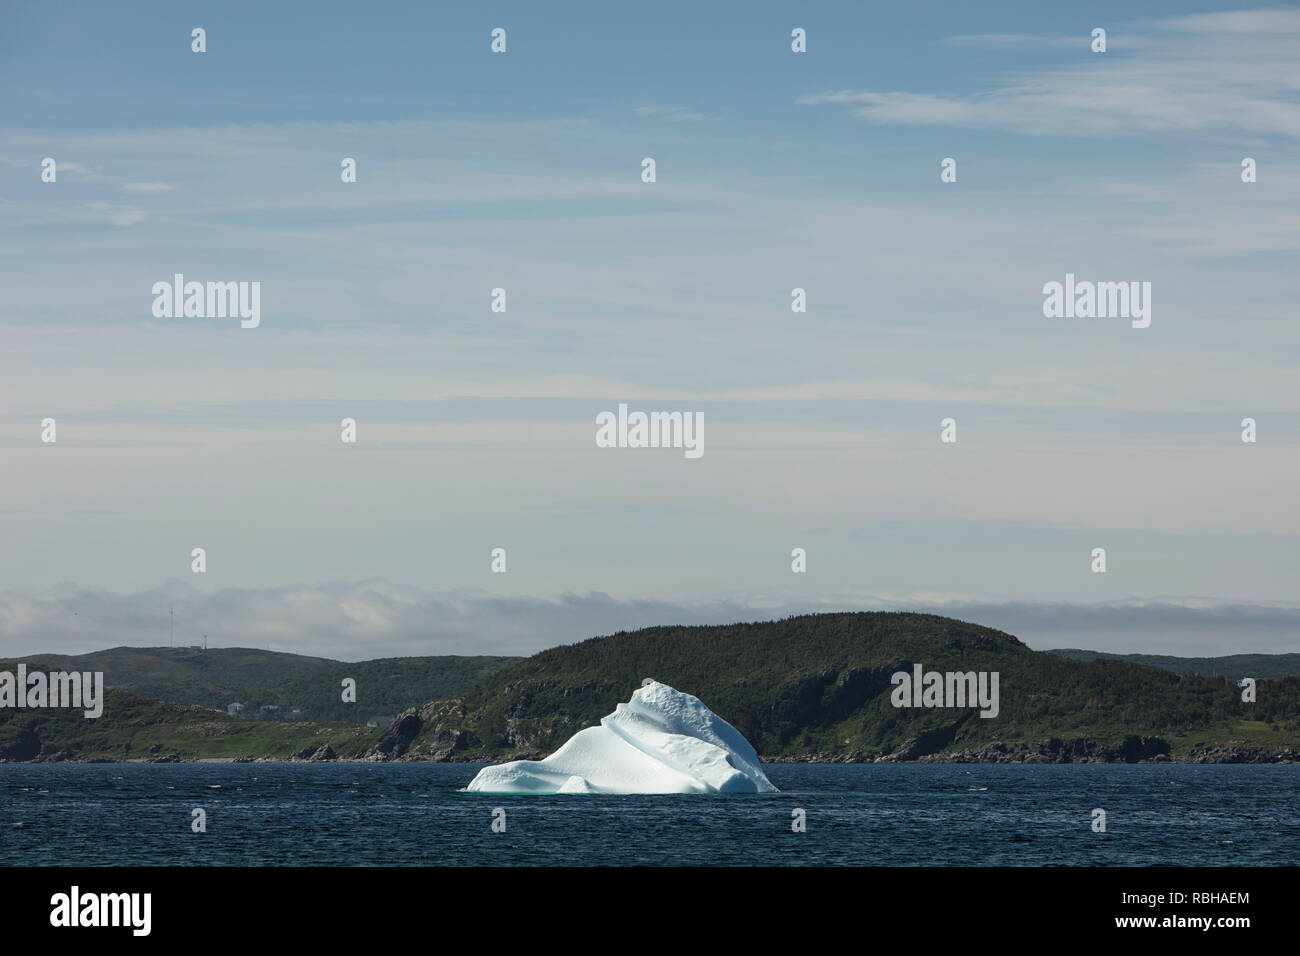 ST ANTHONY, NEWFOUNDLAND, CANADA - July 24, 2018: An iceberg in St Anthony Bight on the Labrador Sea in the Northern area of Newfoundland. Stock Photo